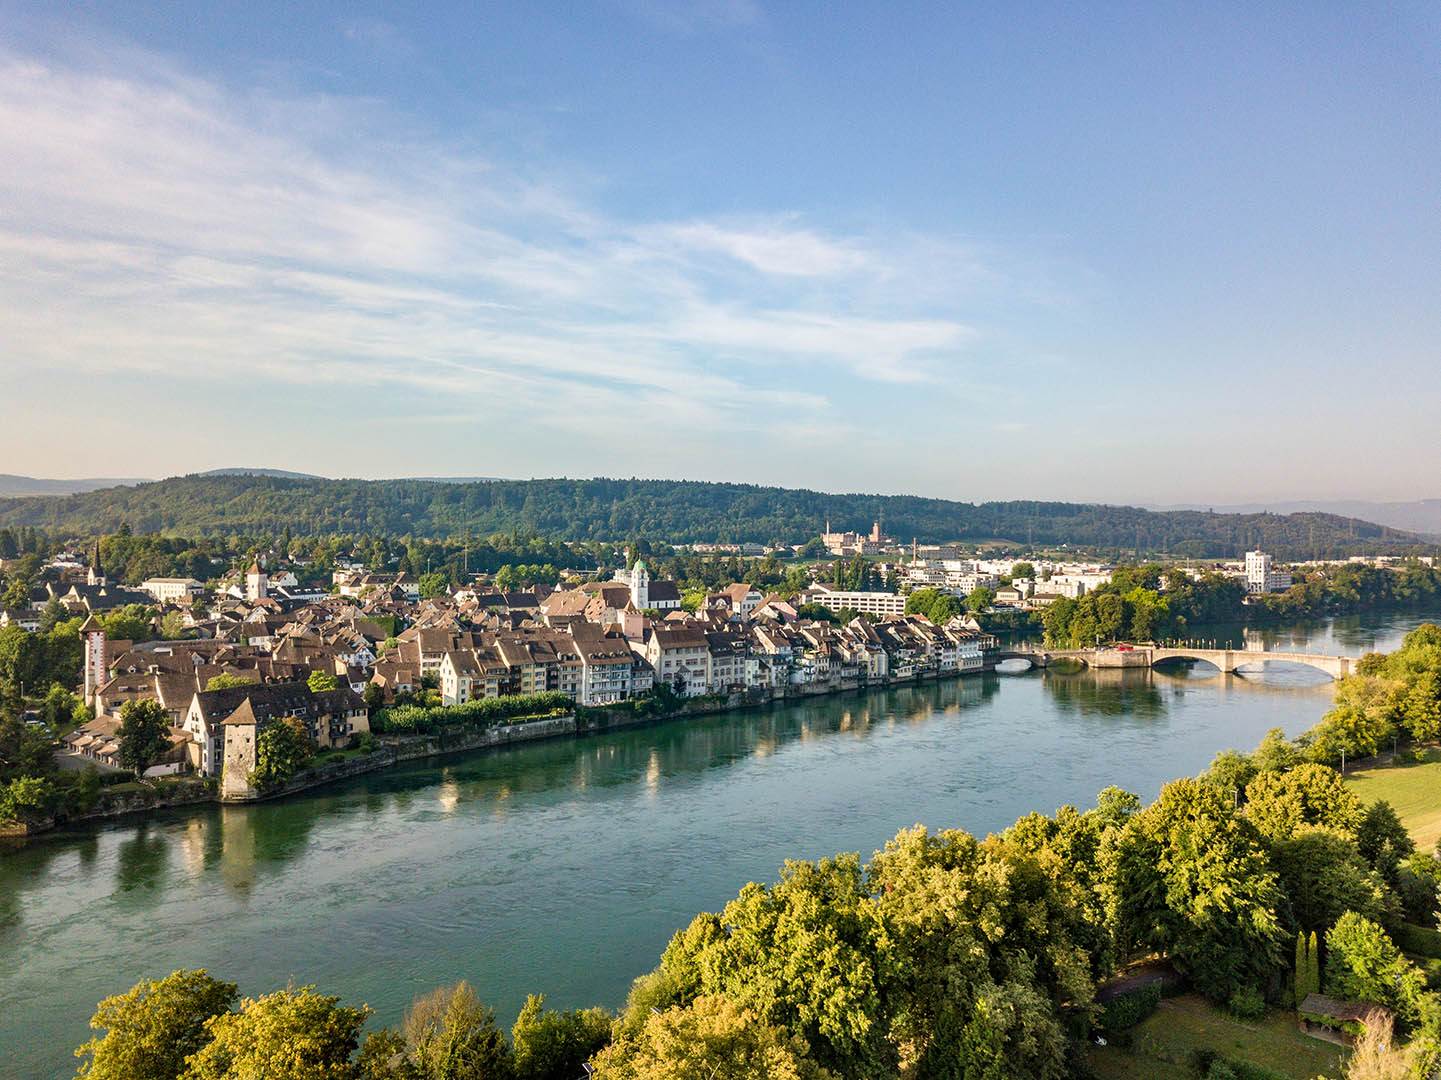 Rheinfelden: The little town with the long memory, Discover Germany magazine